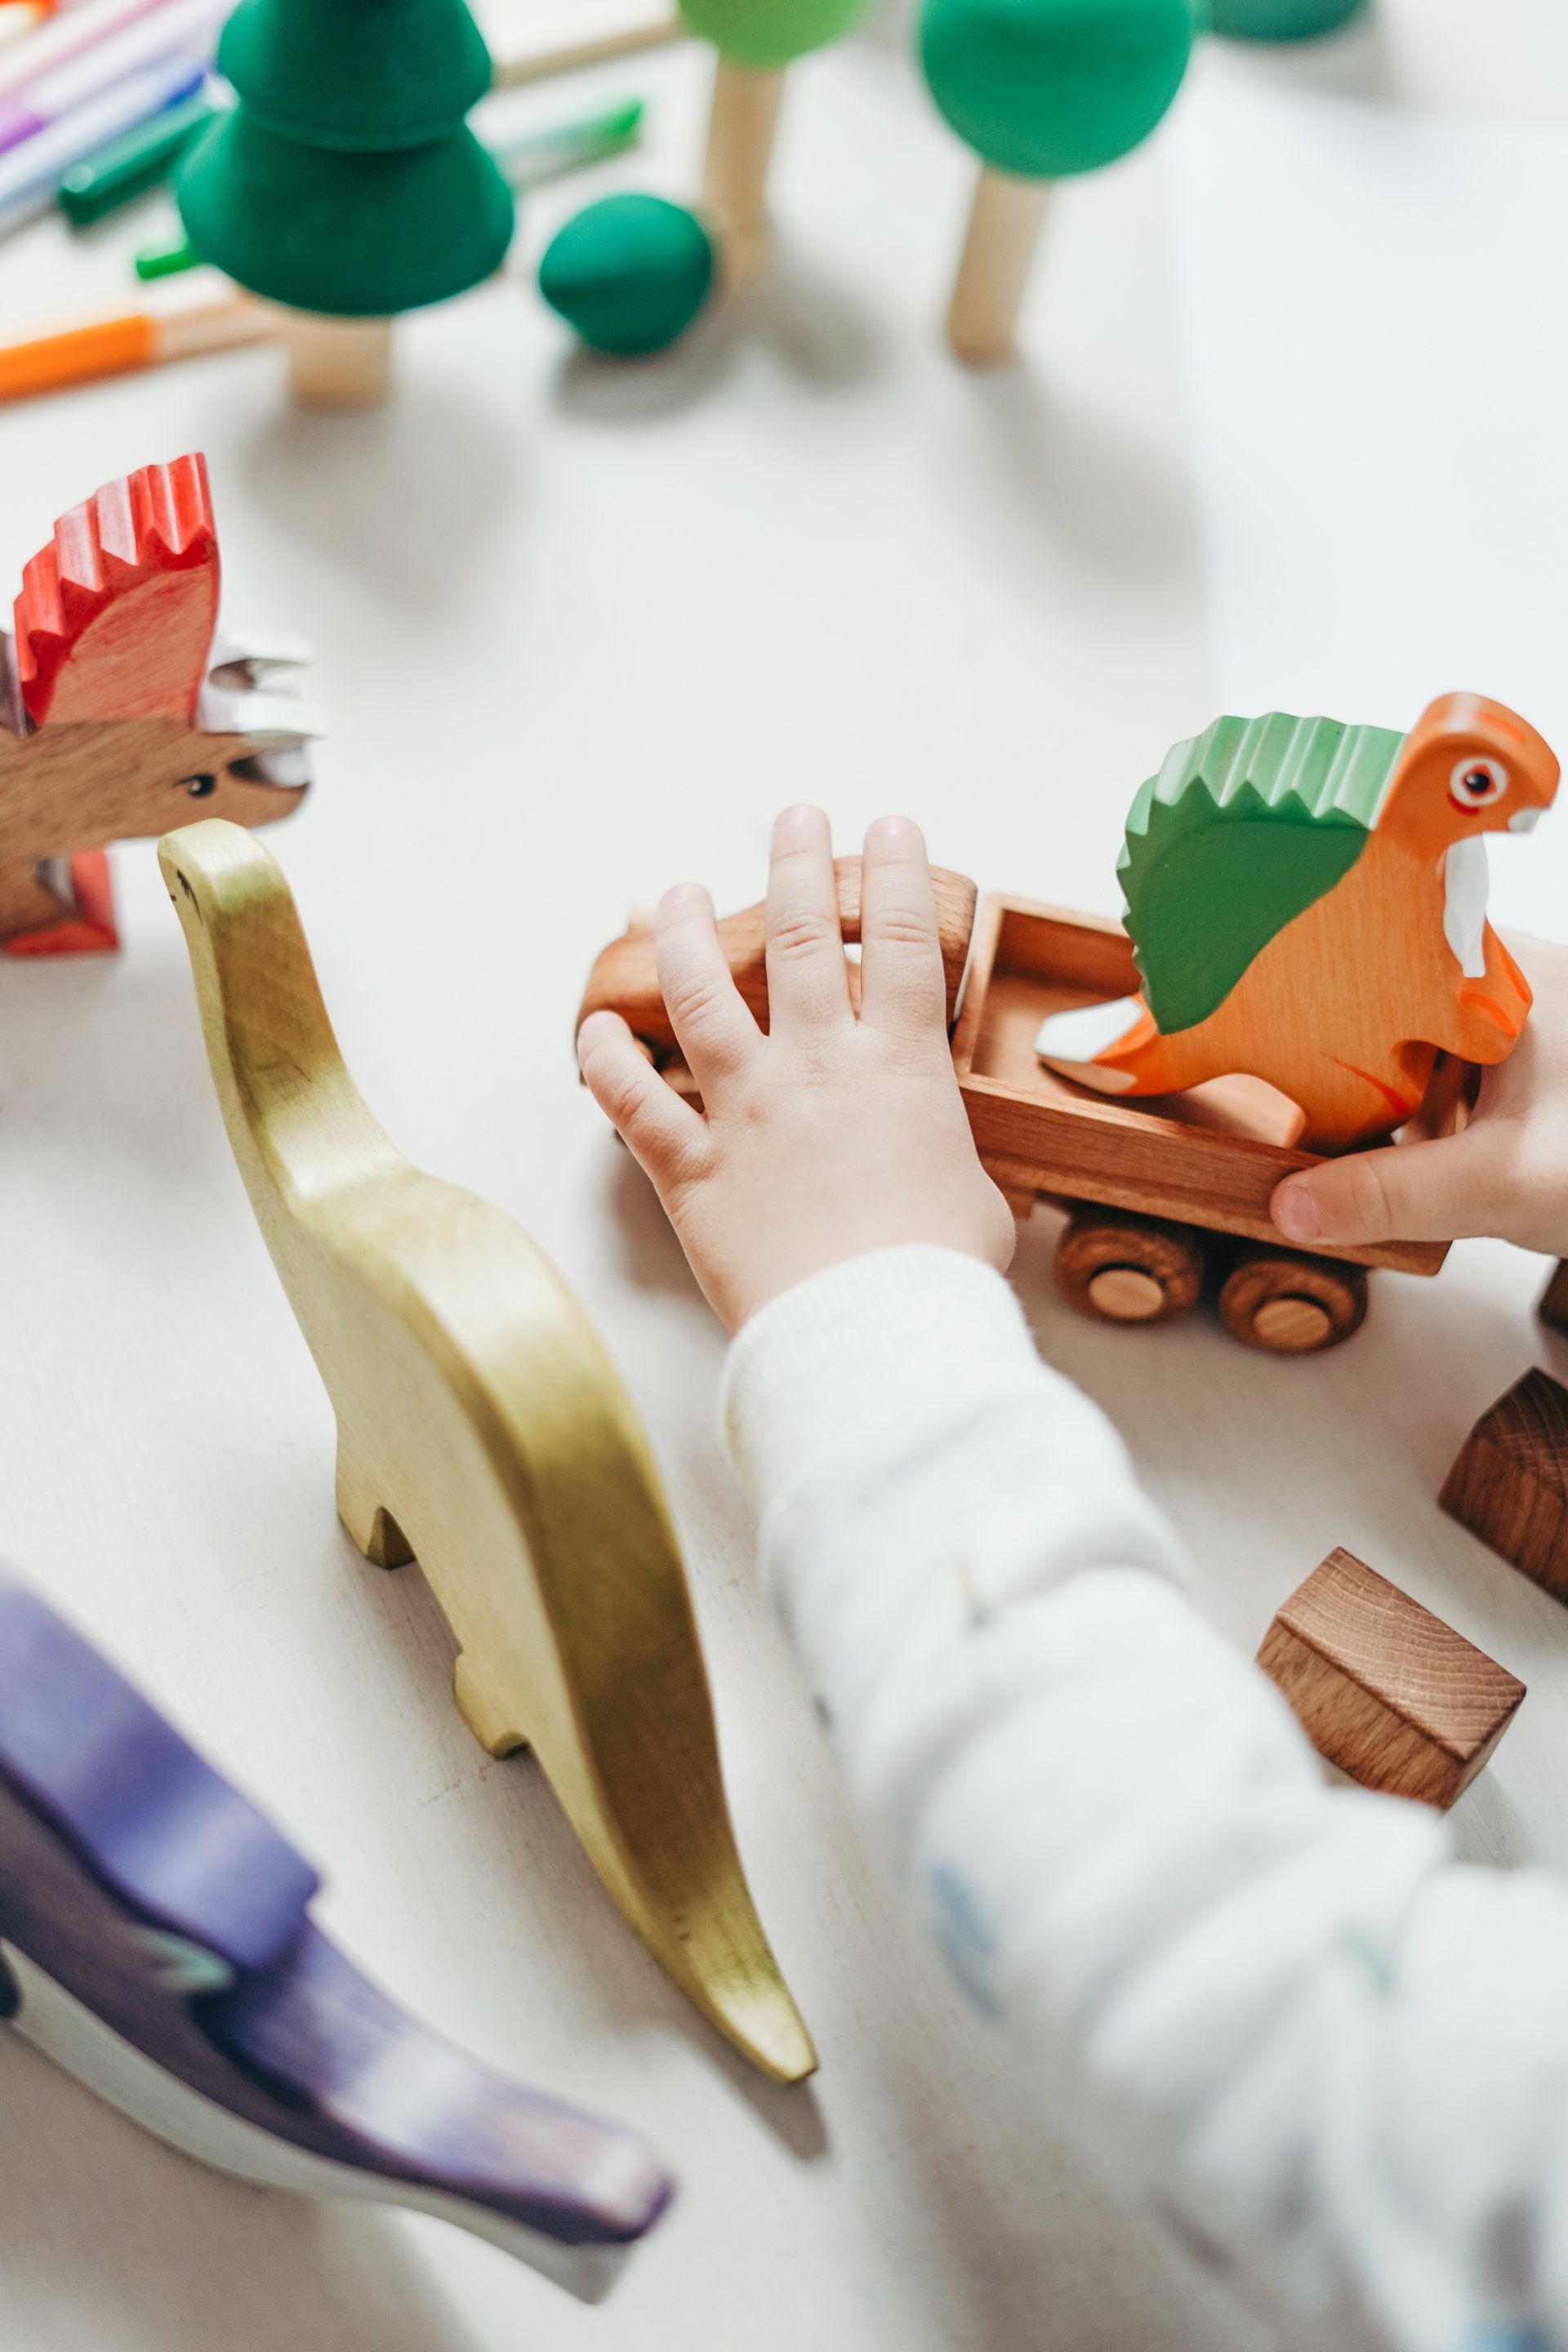 A child is playing with wooden dinosaurs on a table.